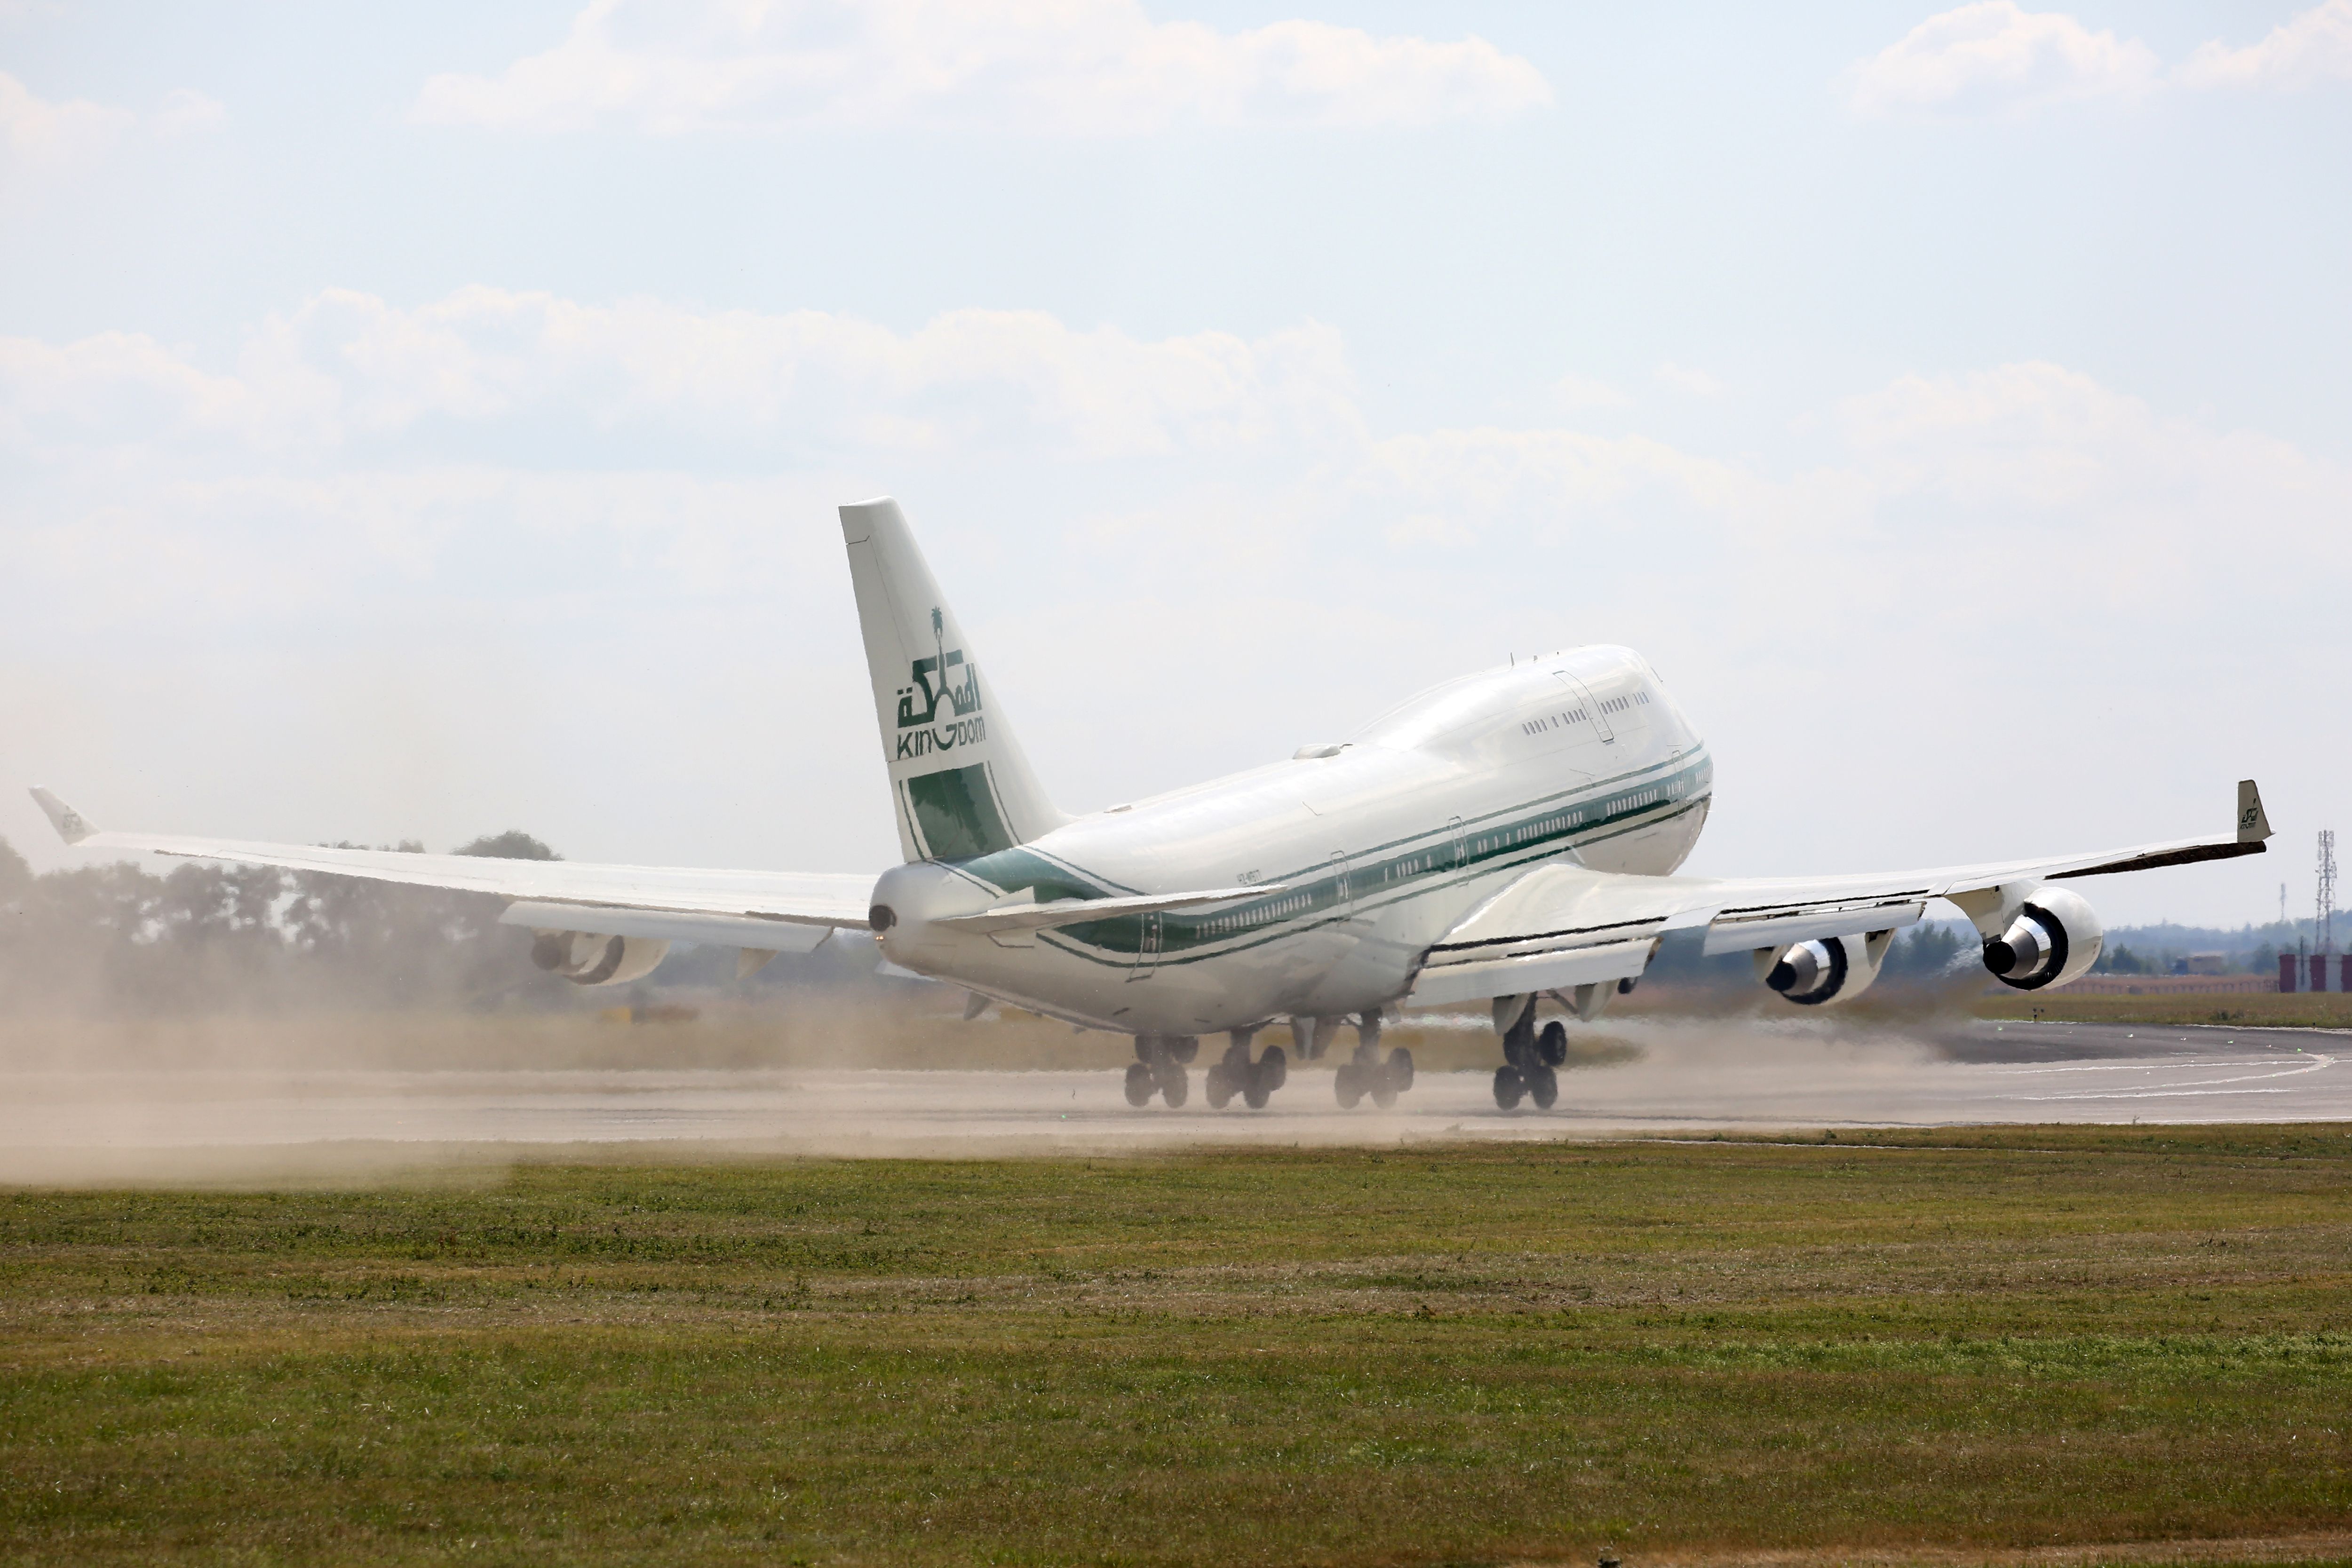 Prince Talal's Boeing 747 departing from a runway.